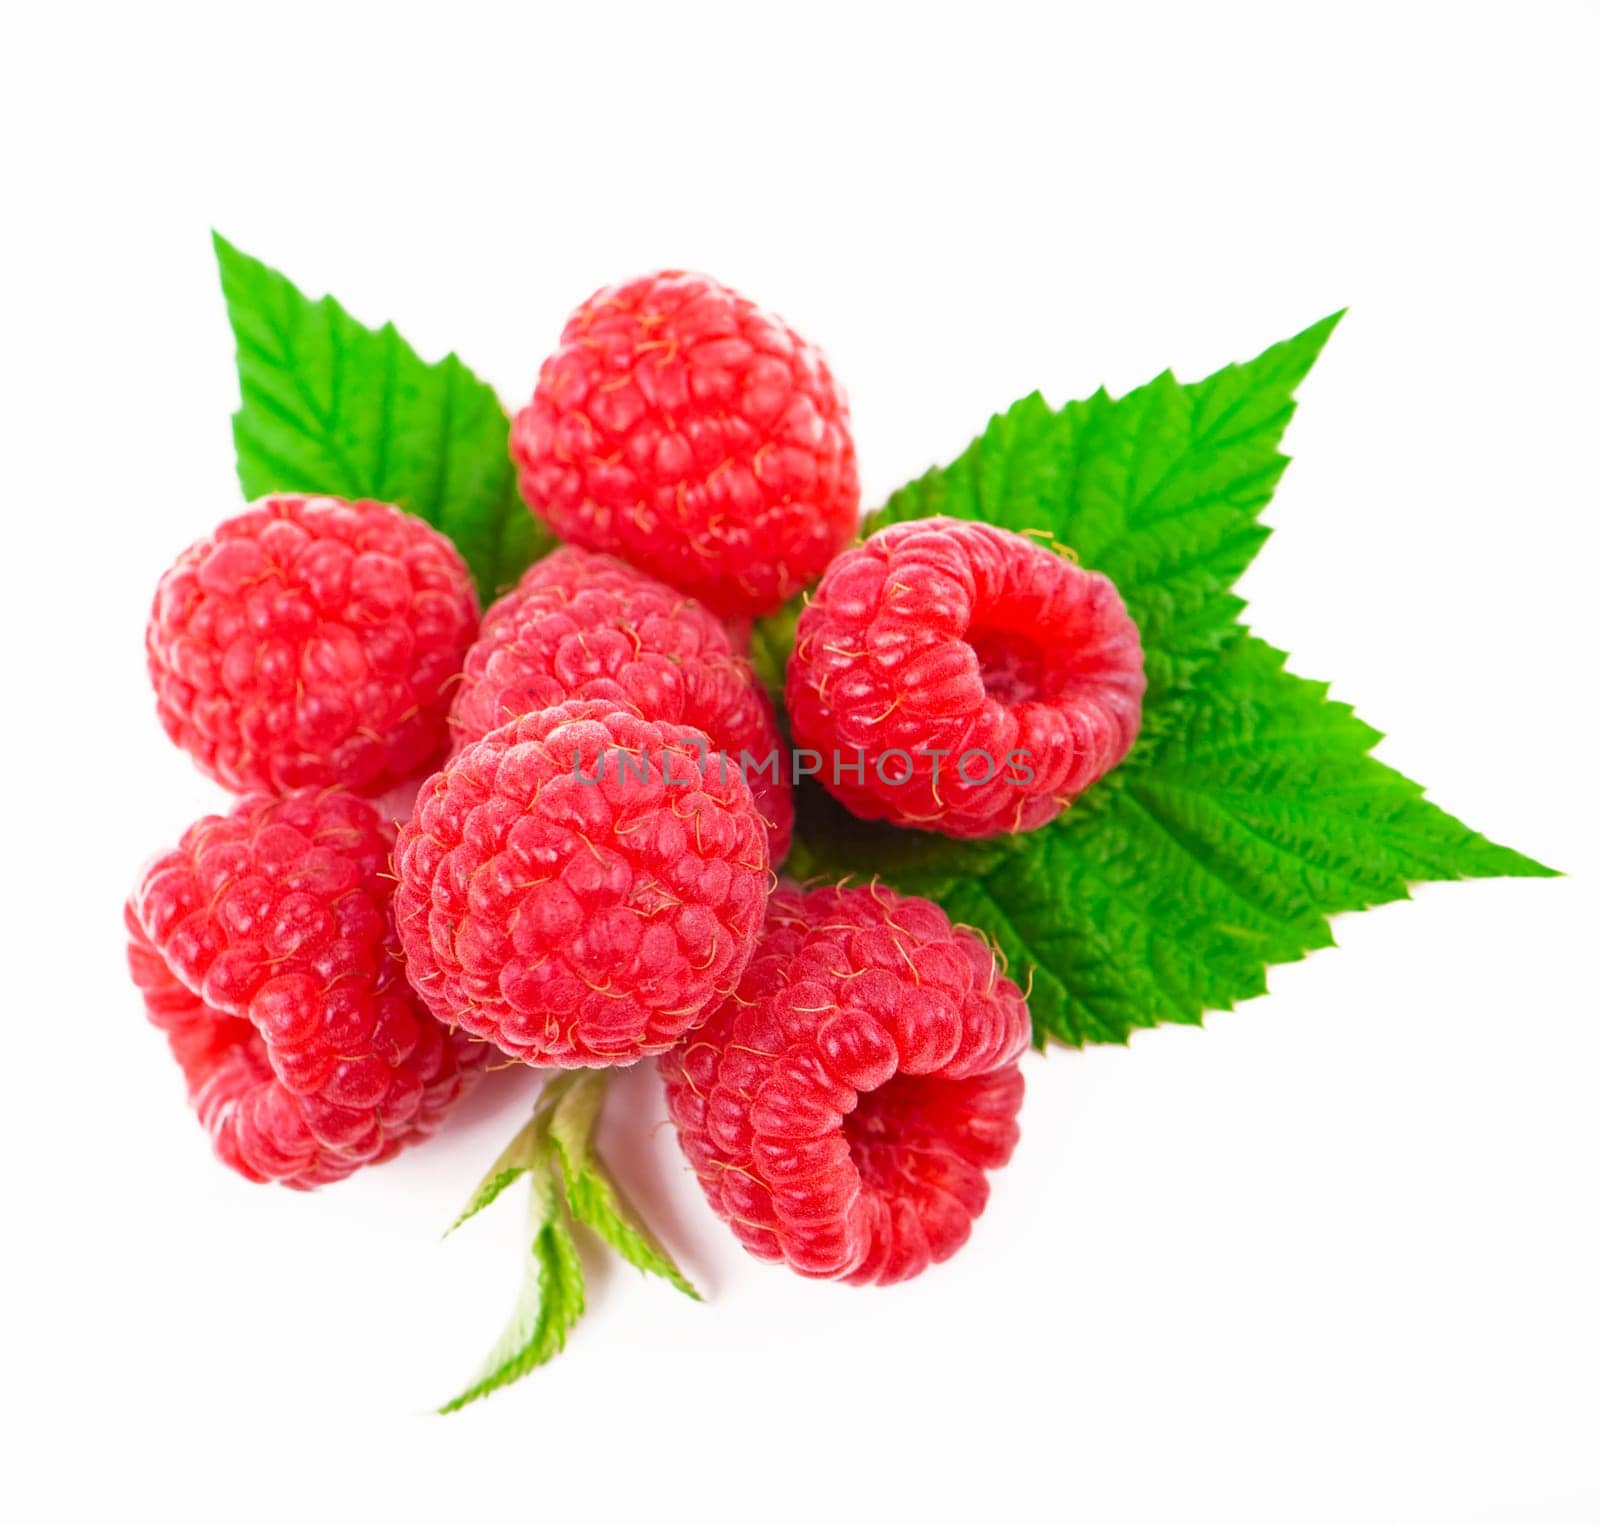 ripe sweet red raspberry with a shade and reflection isolated on a white background